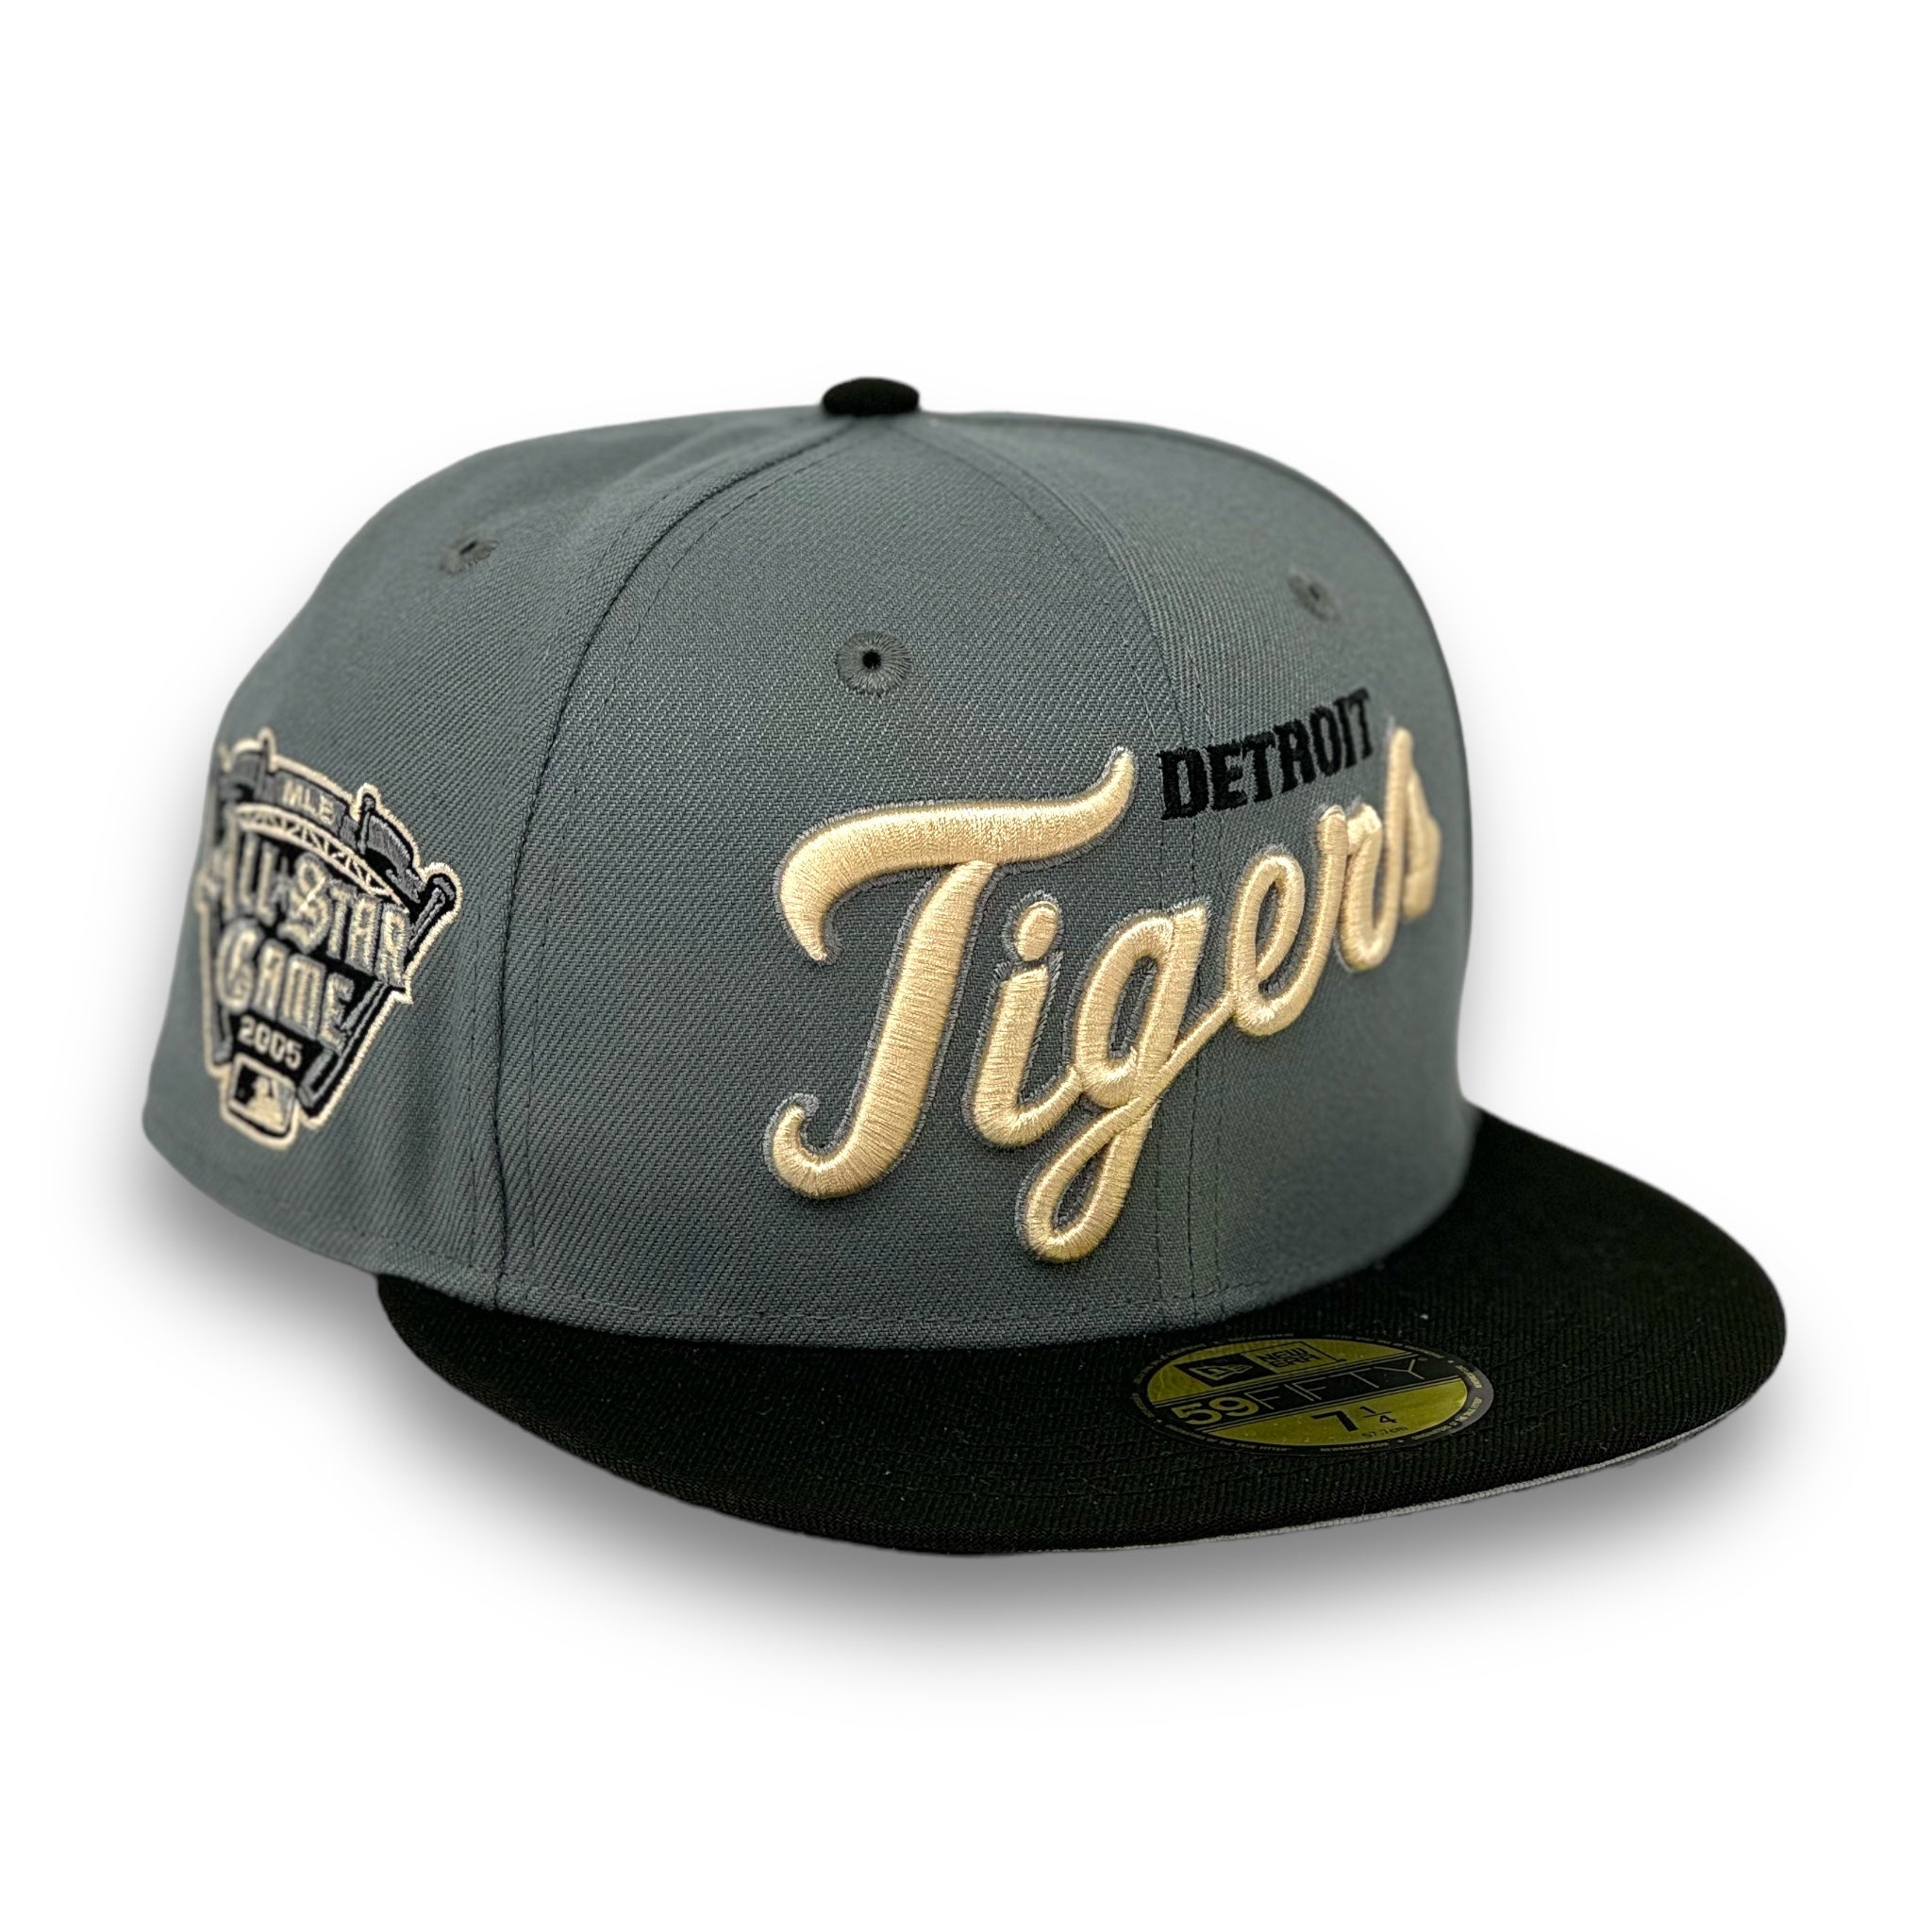 DETROIT TIGERS (GREY) (2005 ALLSTARGAME) NEW ERA 59FIFTY FITTED